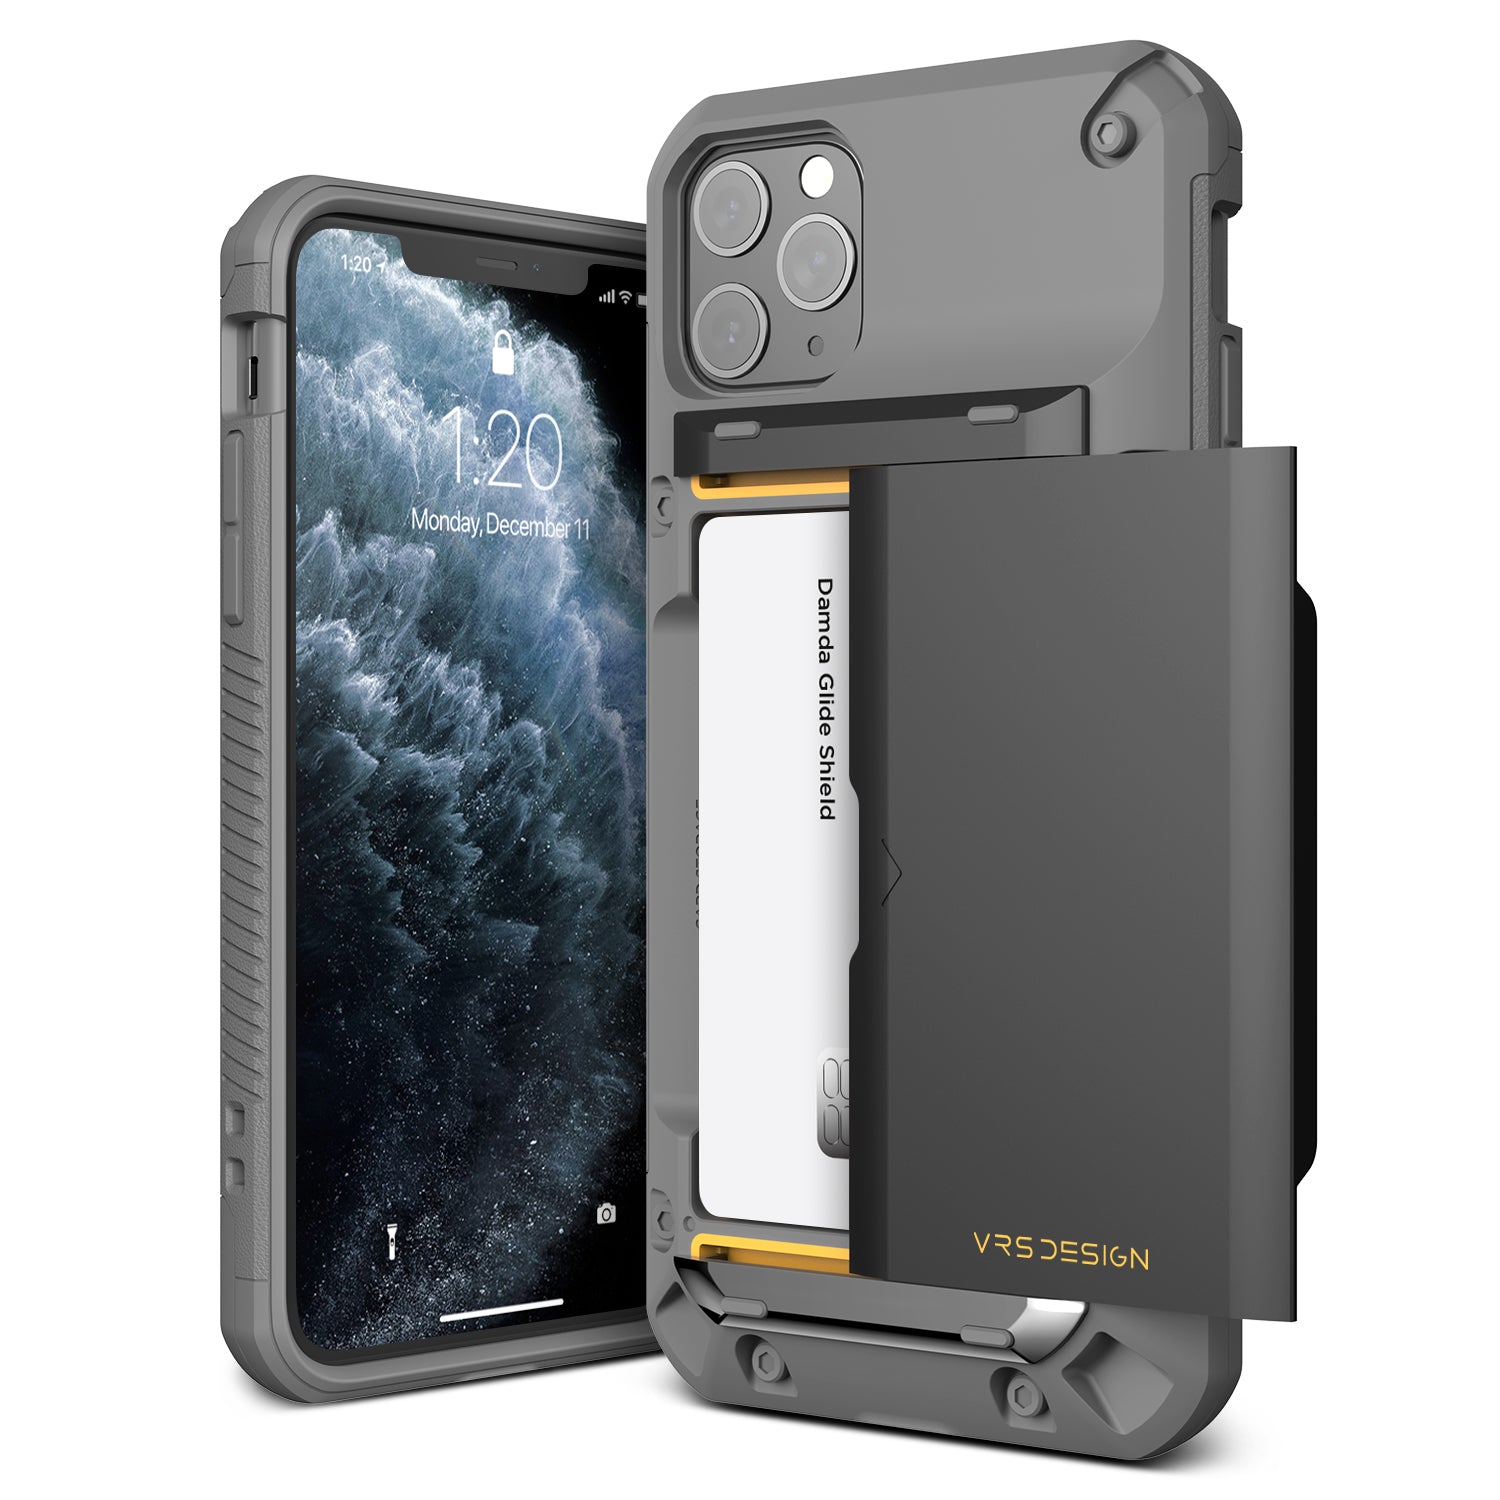 iPhone 11 Pro Case Damda Glide Pro High quality TPU material Body and Real Metal Stripe for extreme drop protection Sufficient 3-4 card tough storage that heavily limits wireless charging.